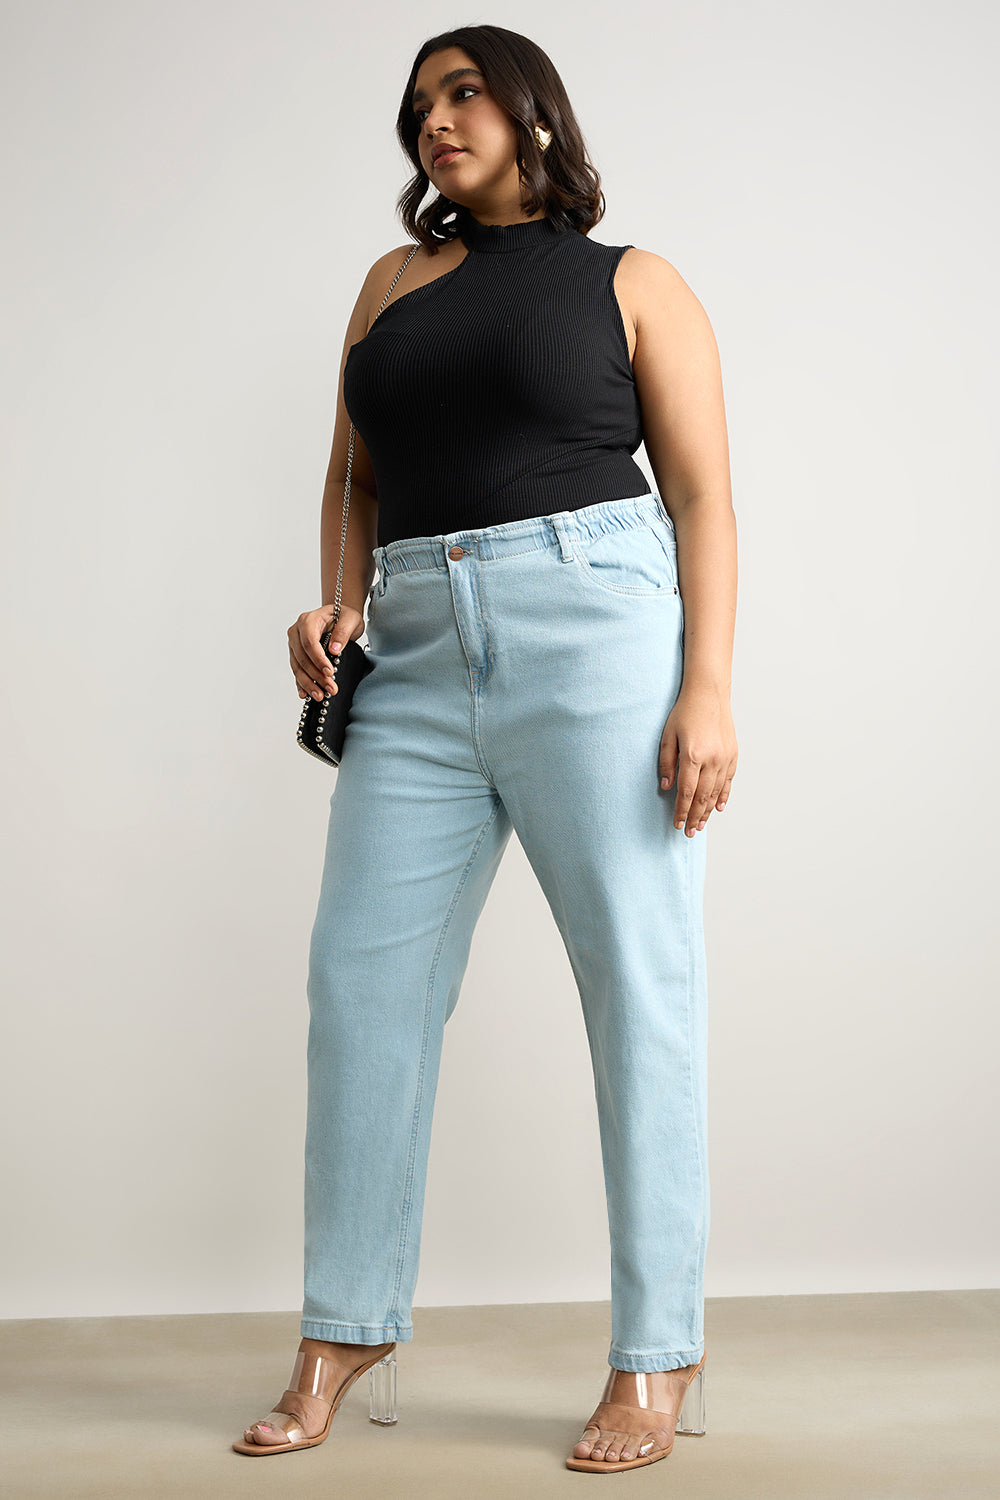 STRETCHY LIGHT WASH MOM JEANS